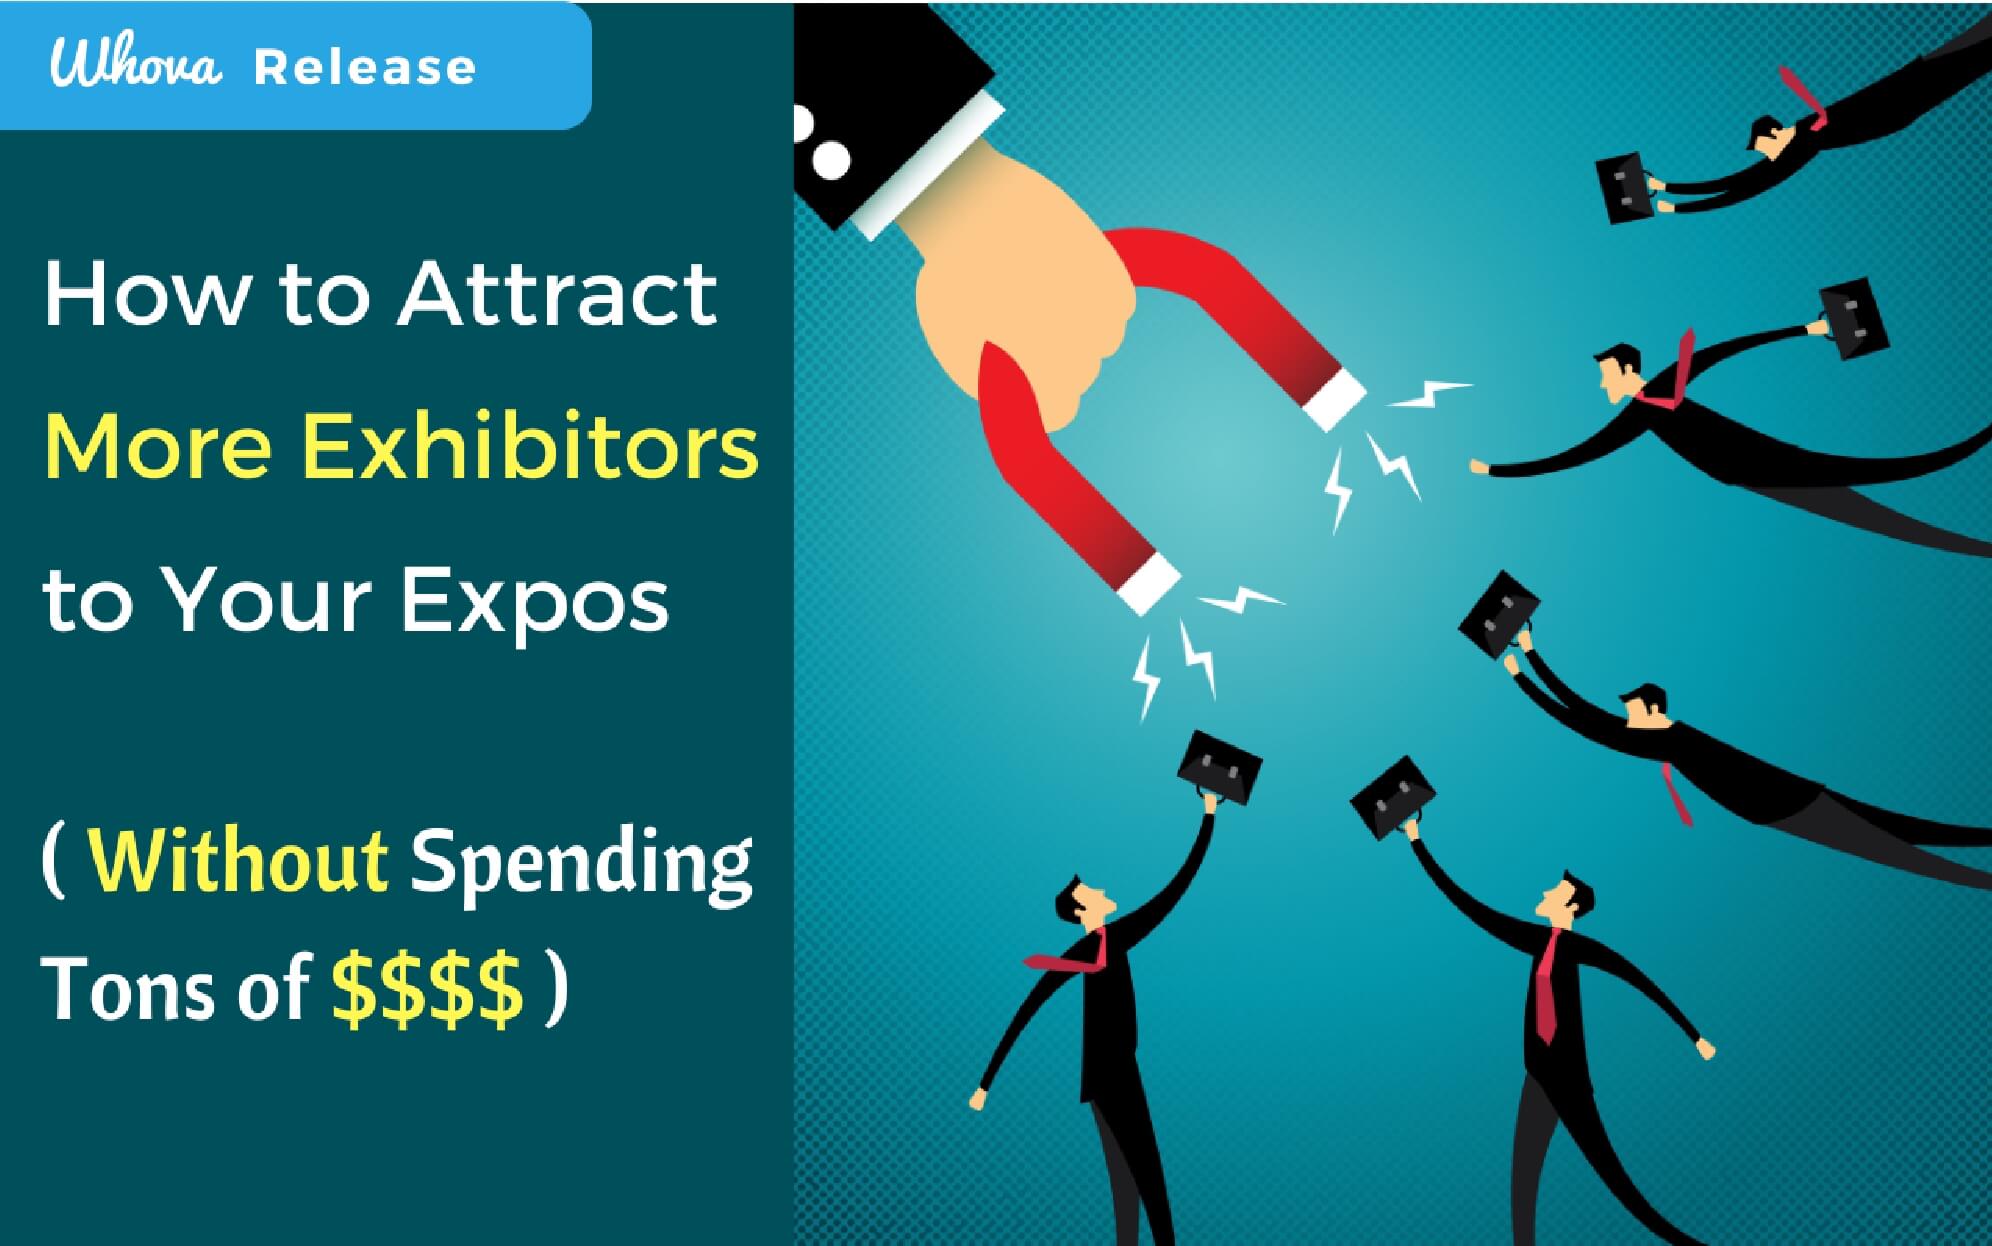 How to Attract More Exhibitors to Your Expos  (Without Spending Tons of Money)